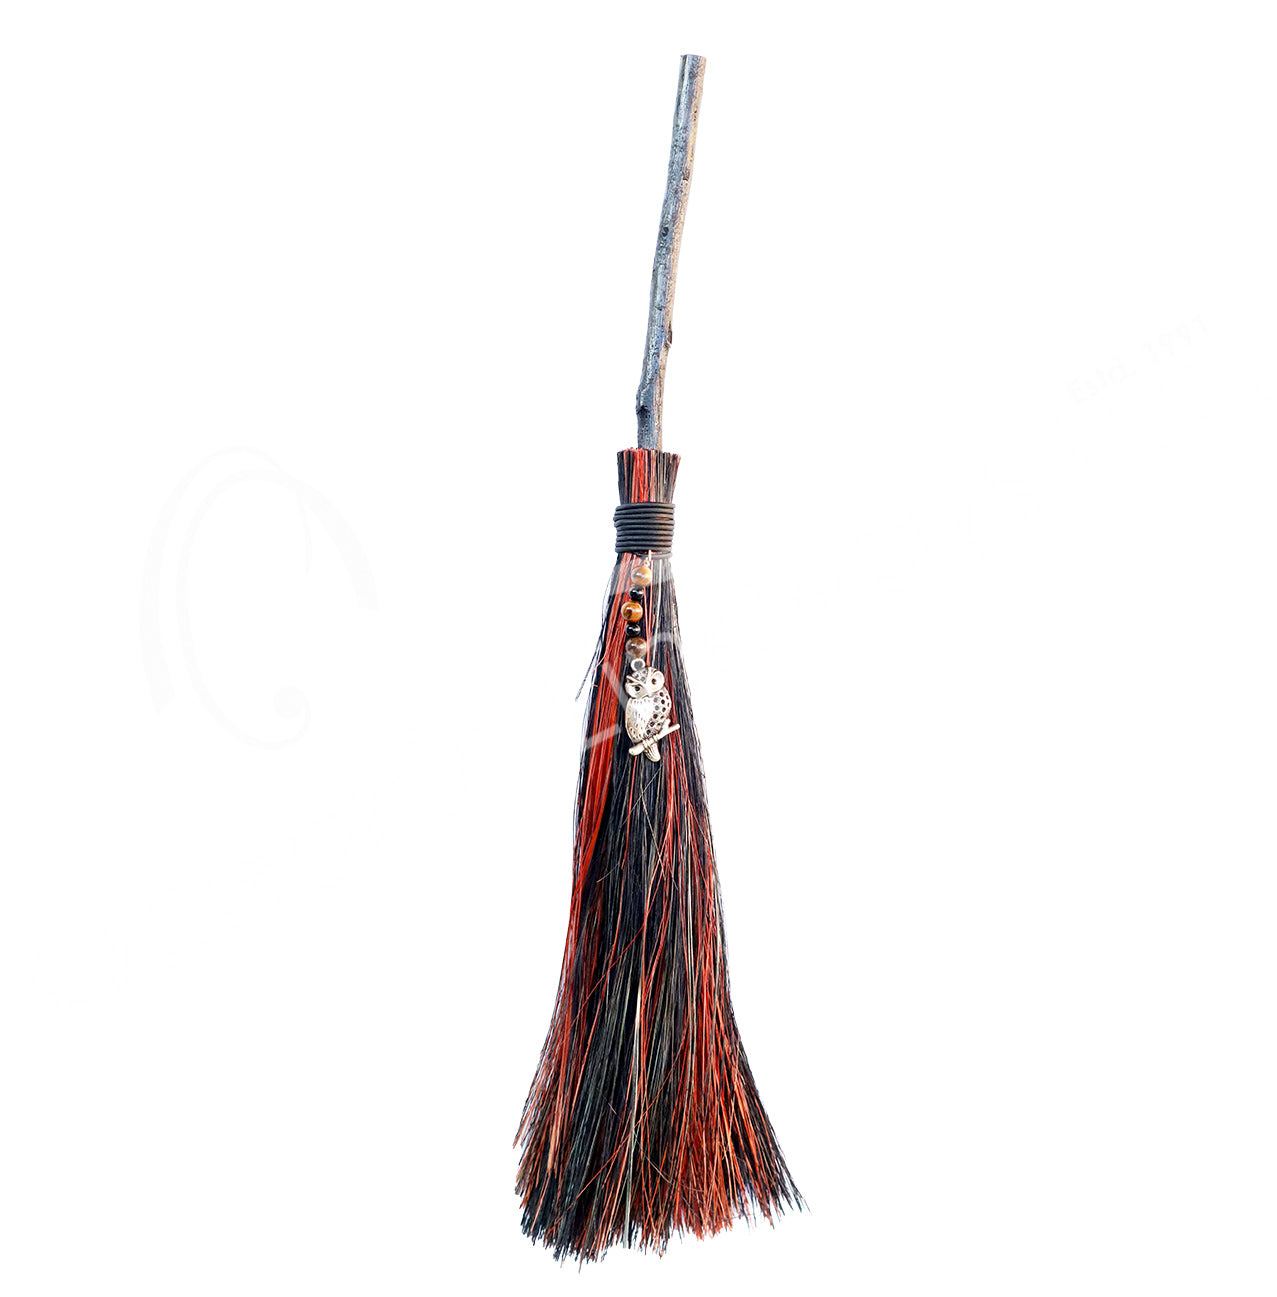 18" besom; black and brown w/ tiger's eye